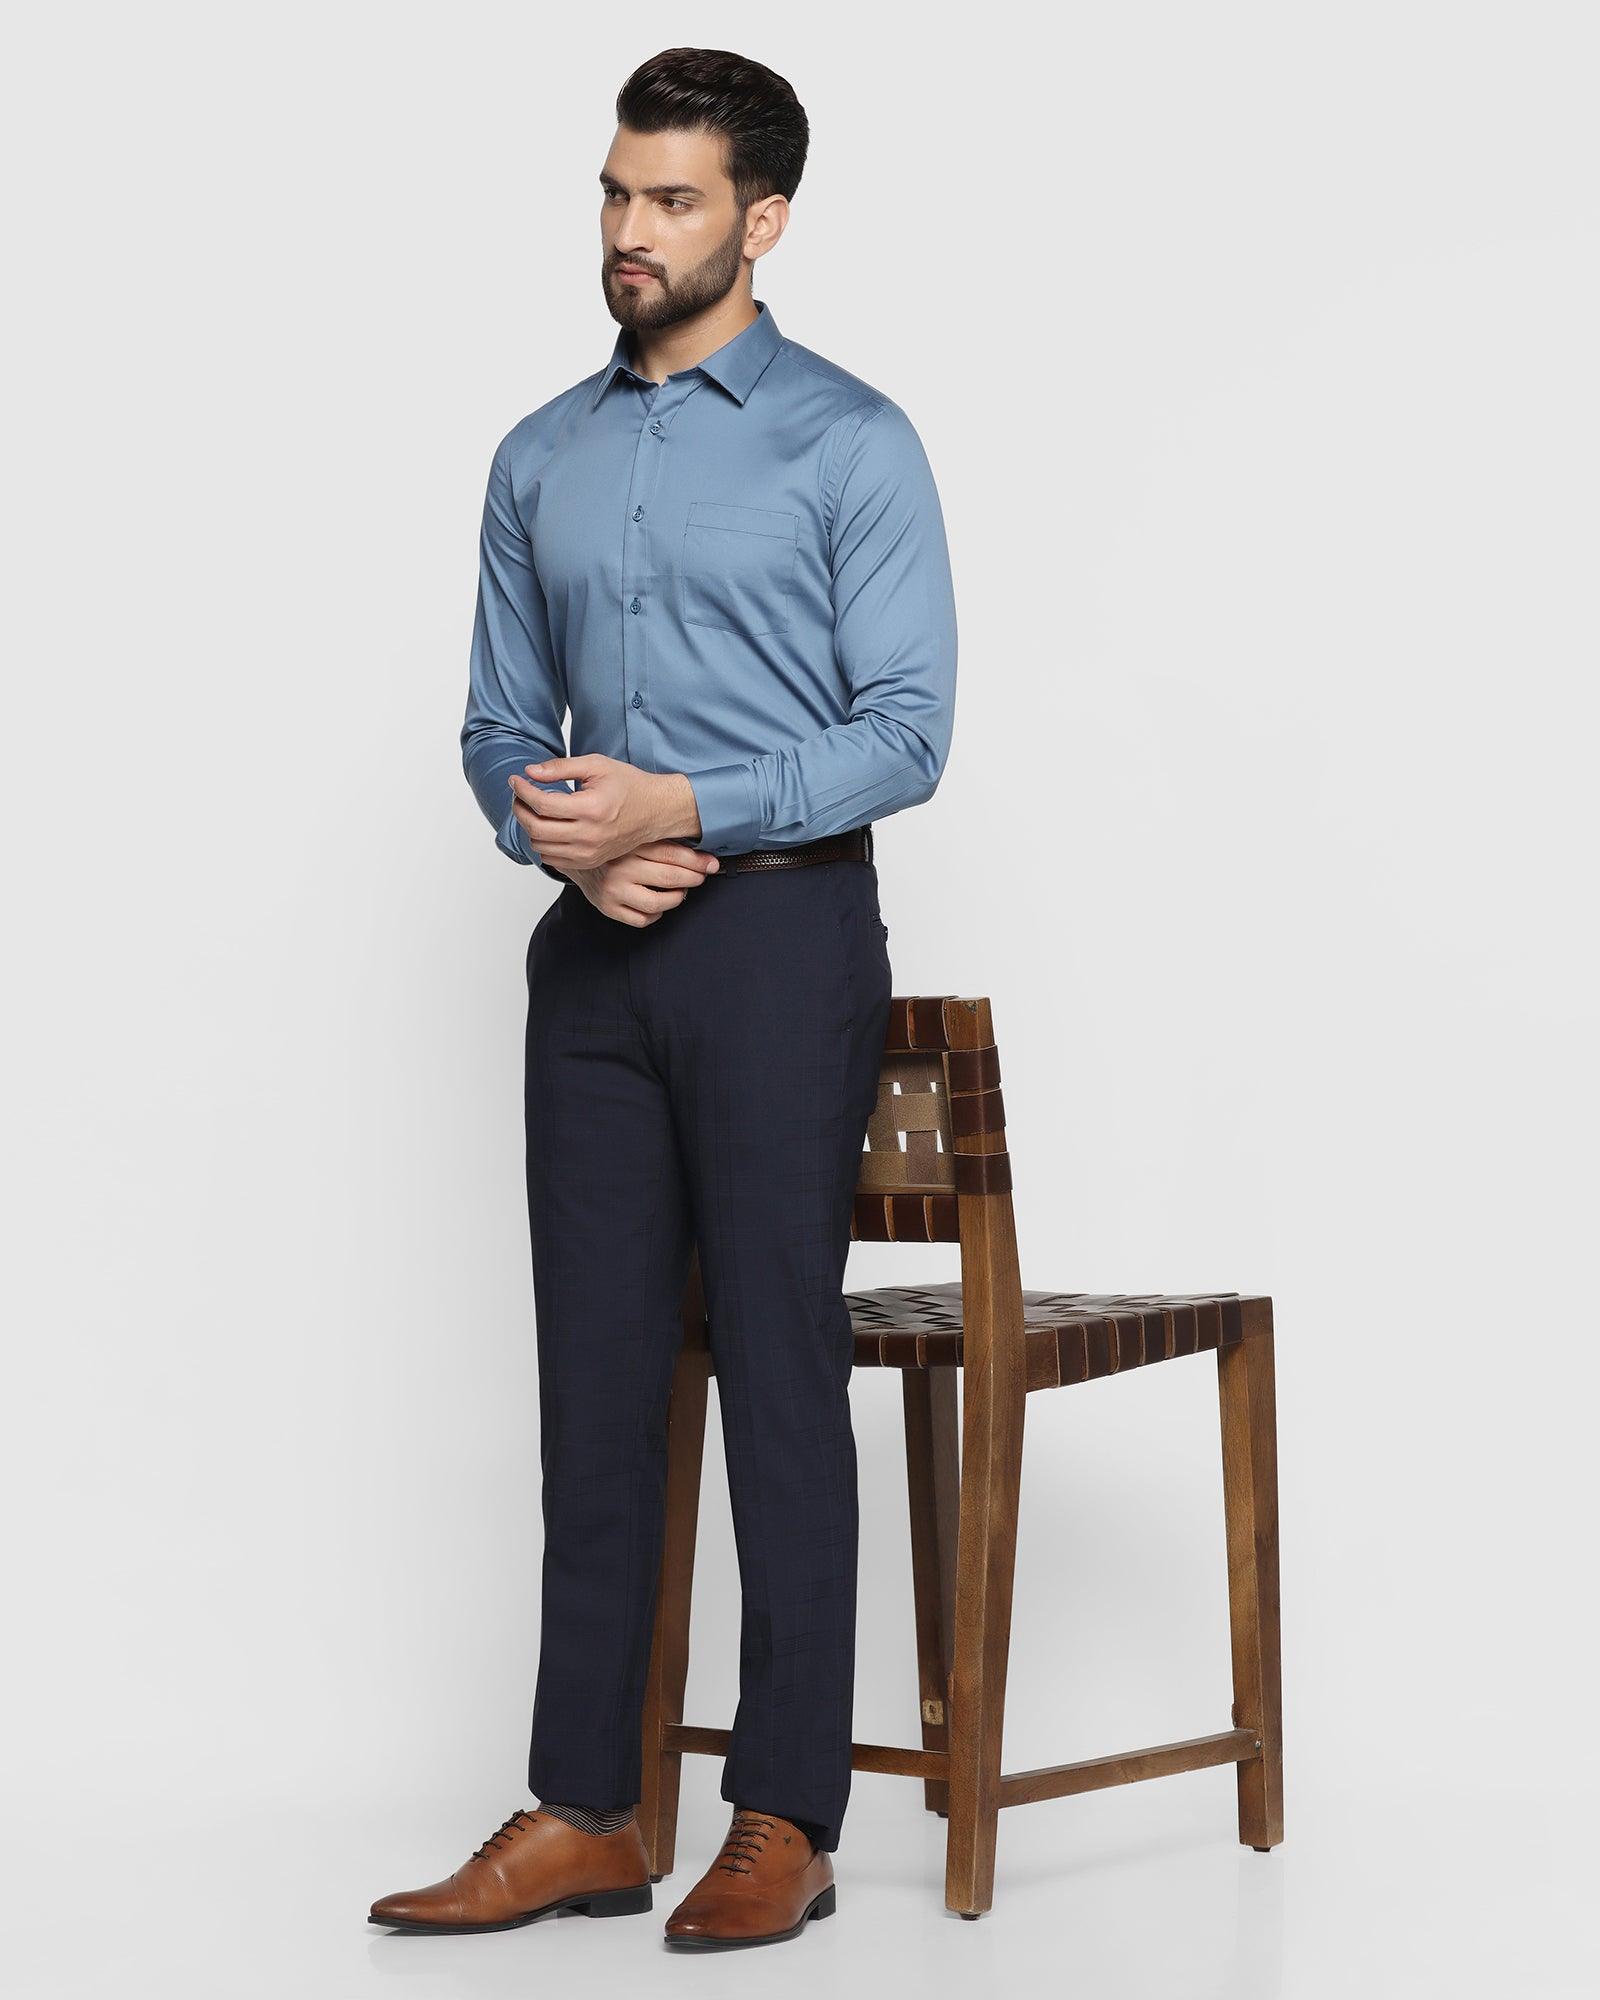 Luxe Slim Comfort B-95 Formal Navy Check Trouser - Norm